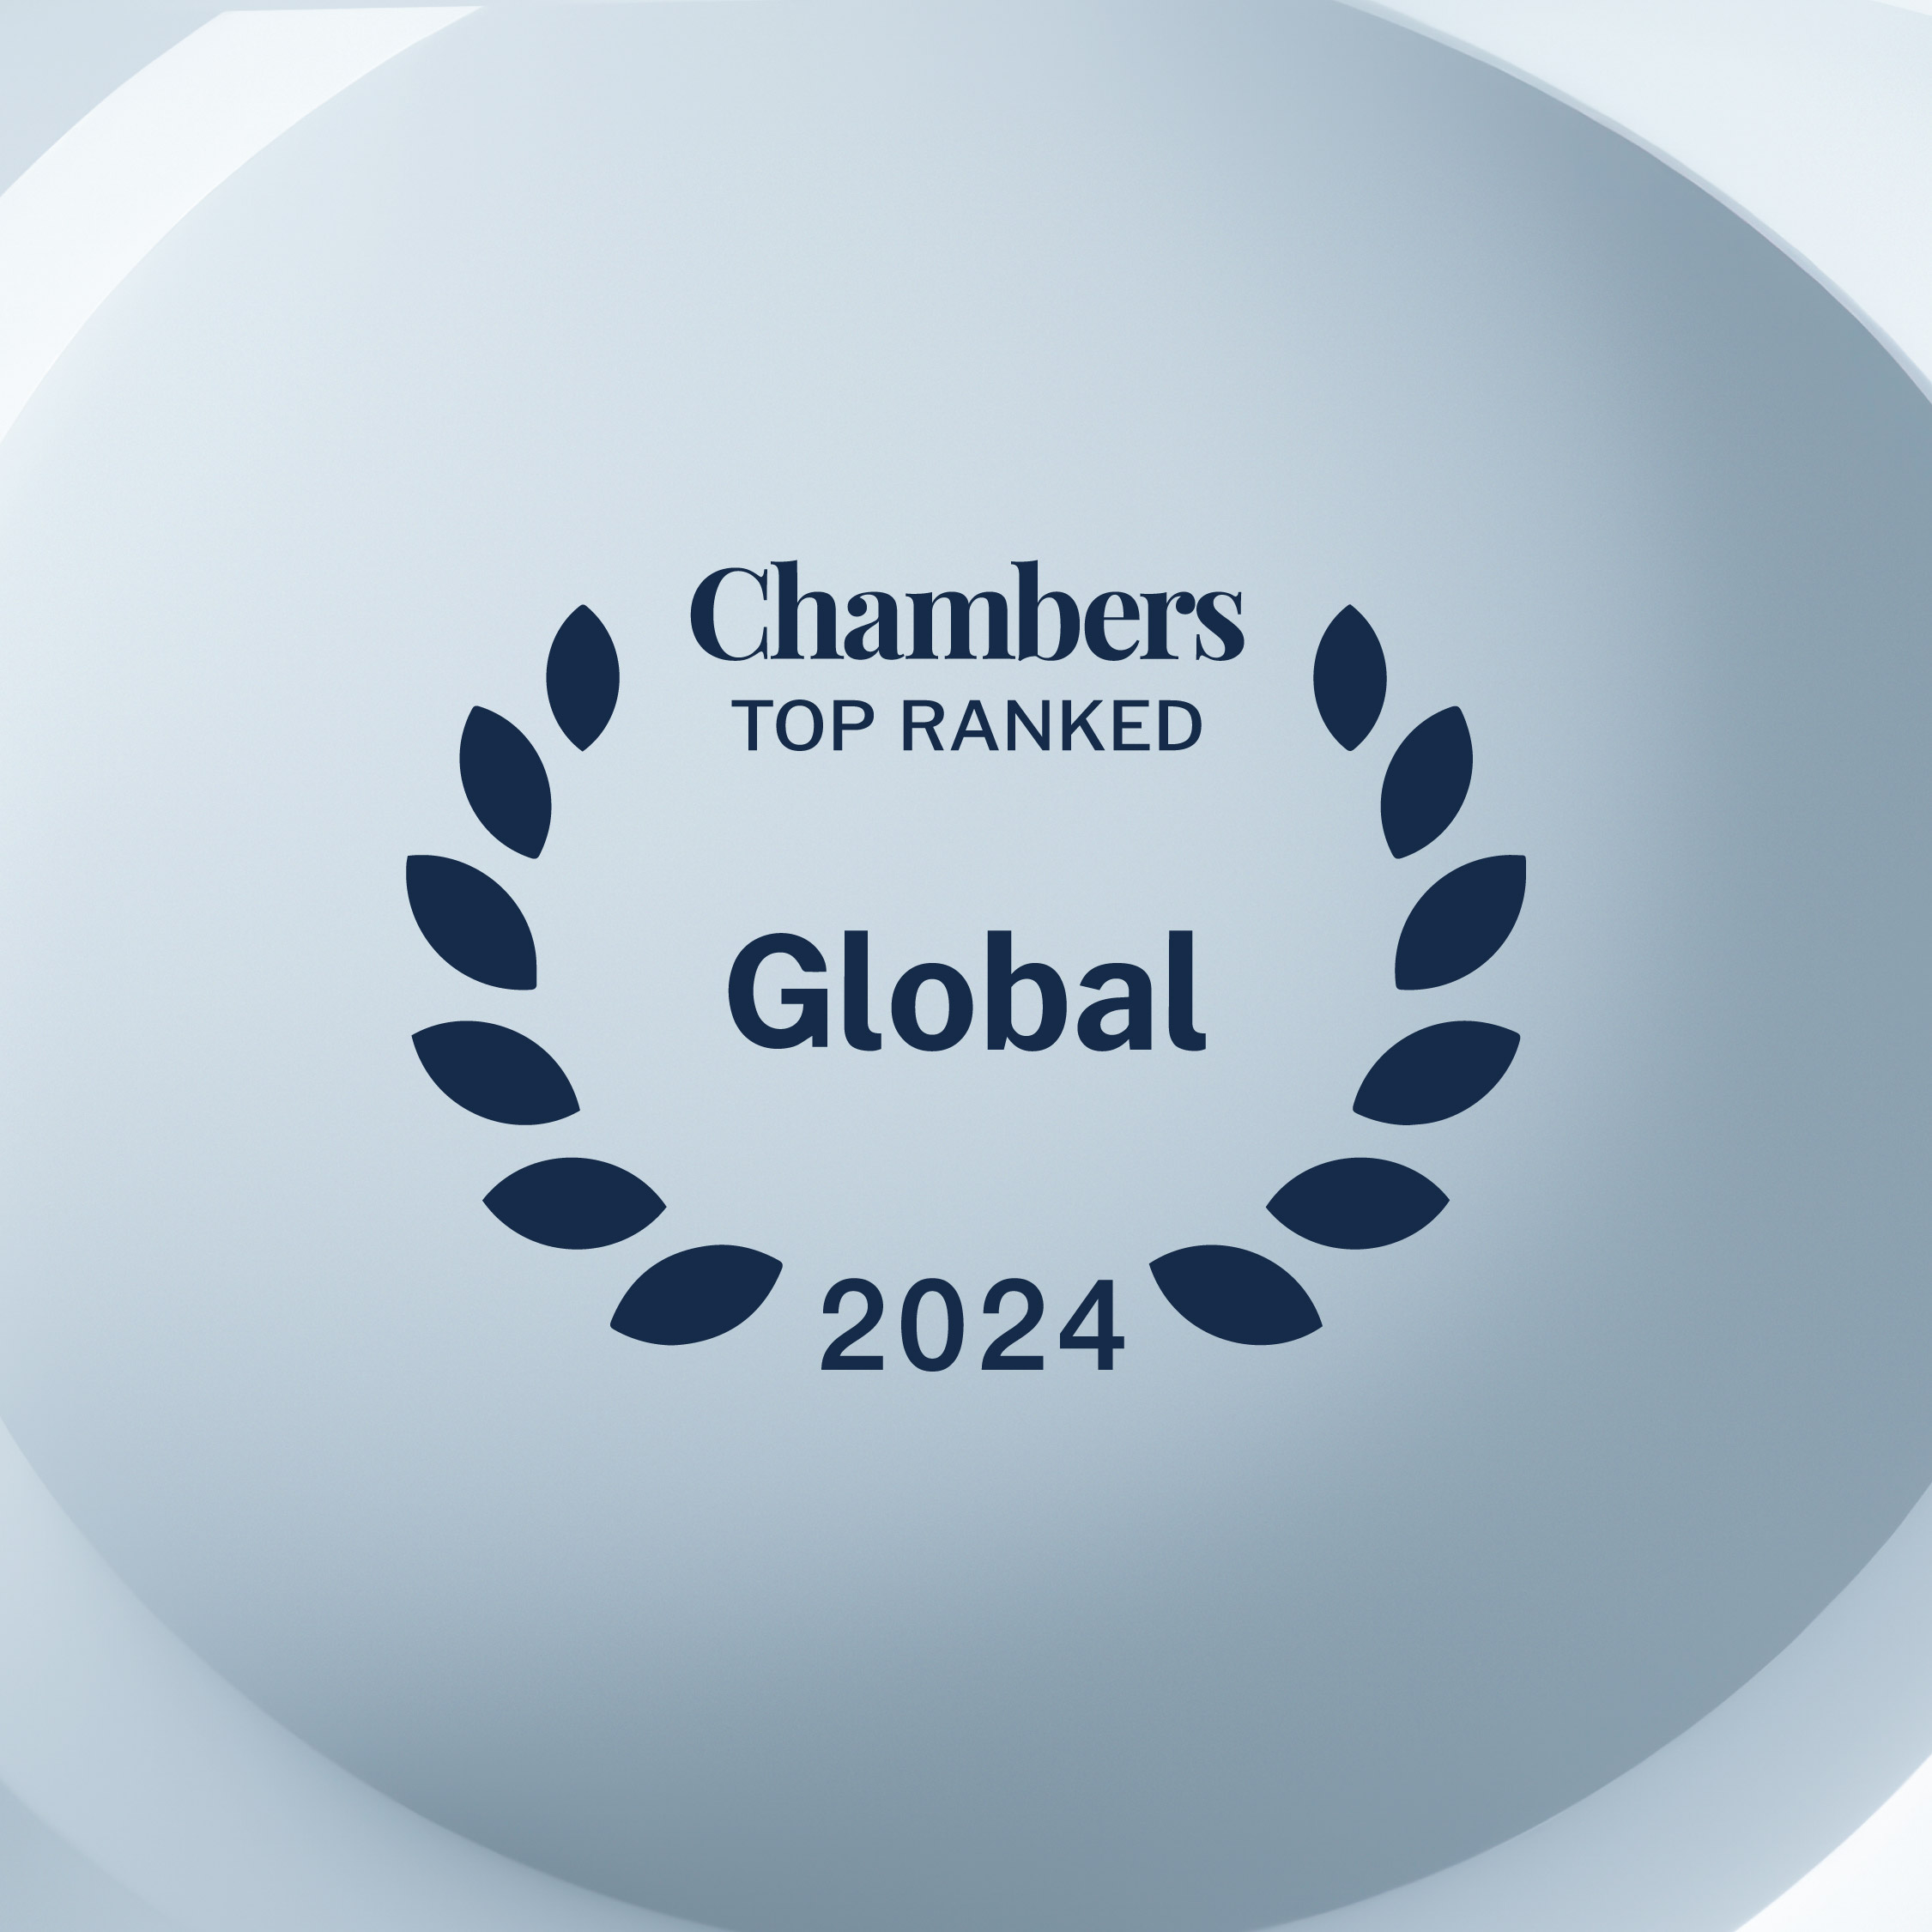 Bruchou & Funes de Rioja leading Law Firm in Argentina by Chambers and Partners Global Guide 2024